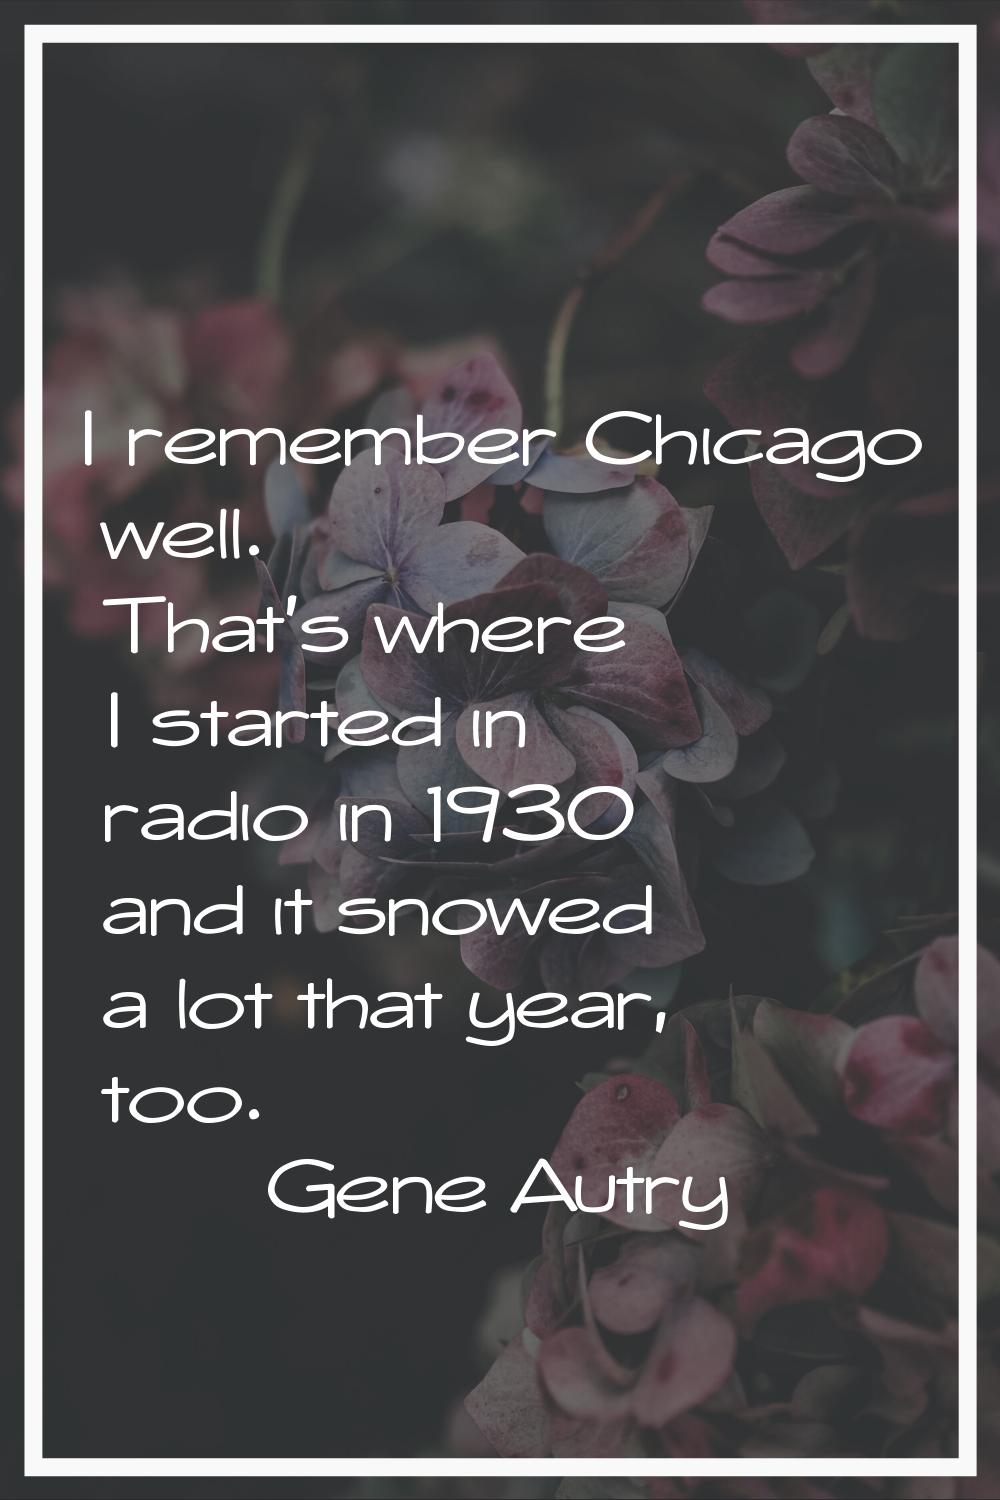 I remember Chicago well. That's where I started in radio in 1930 and it snowed a lot that year, too